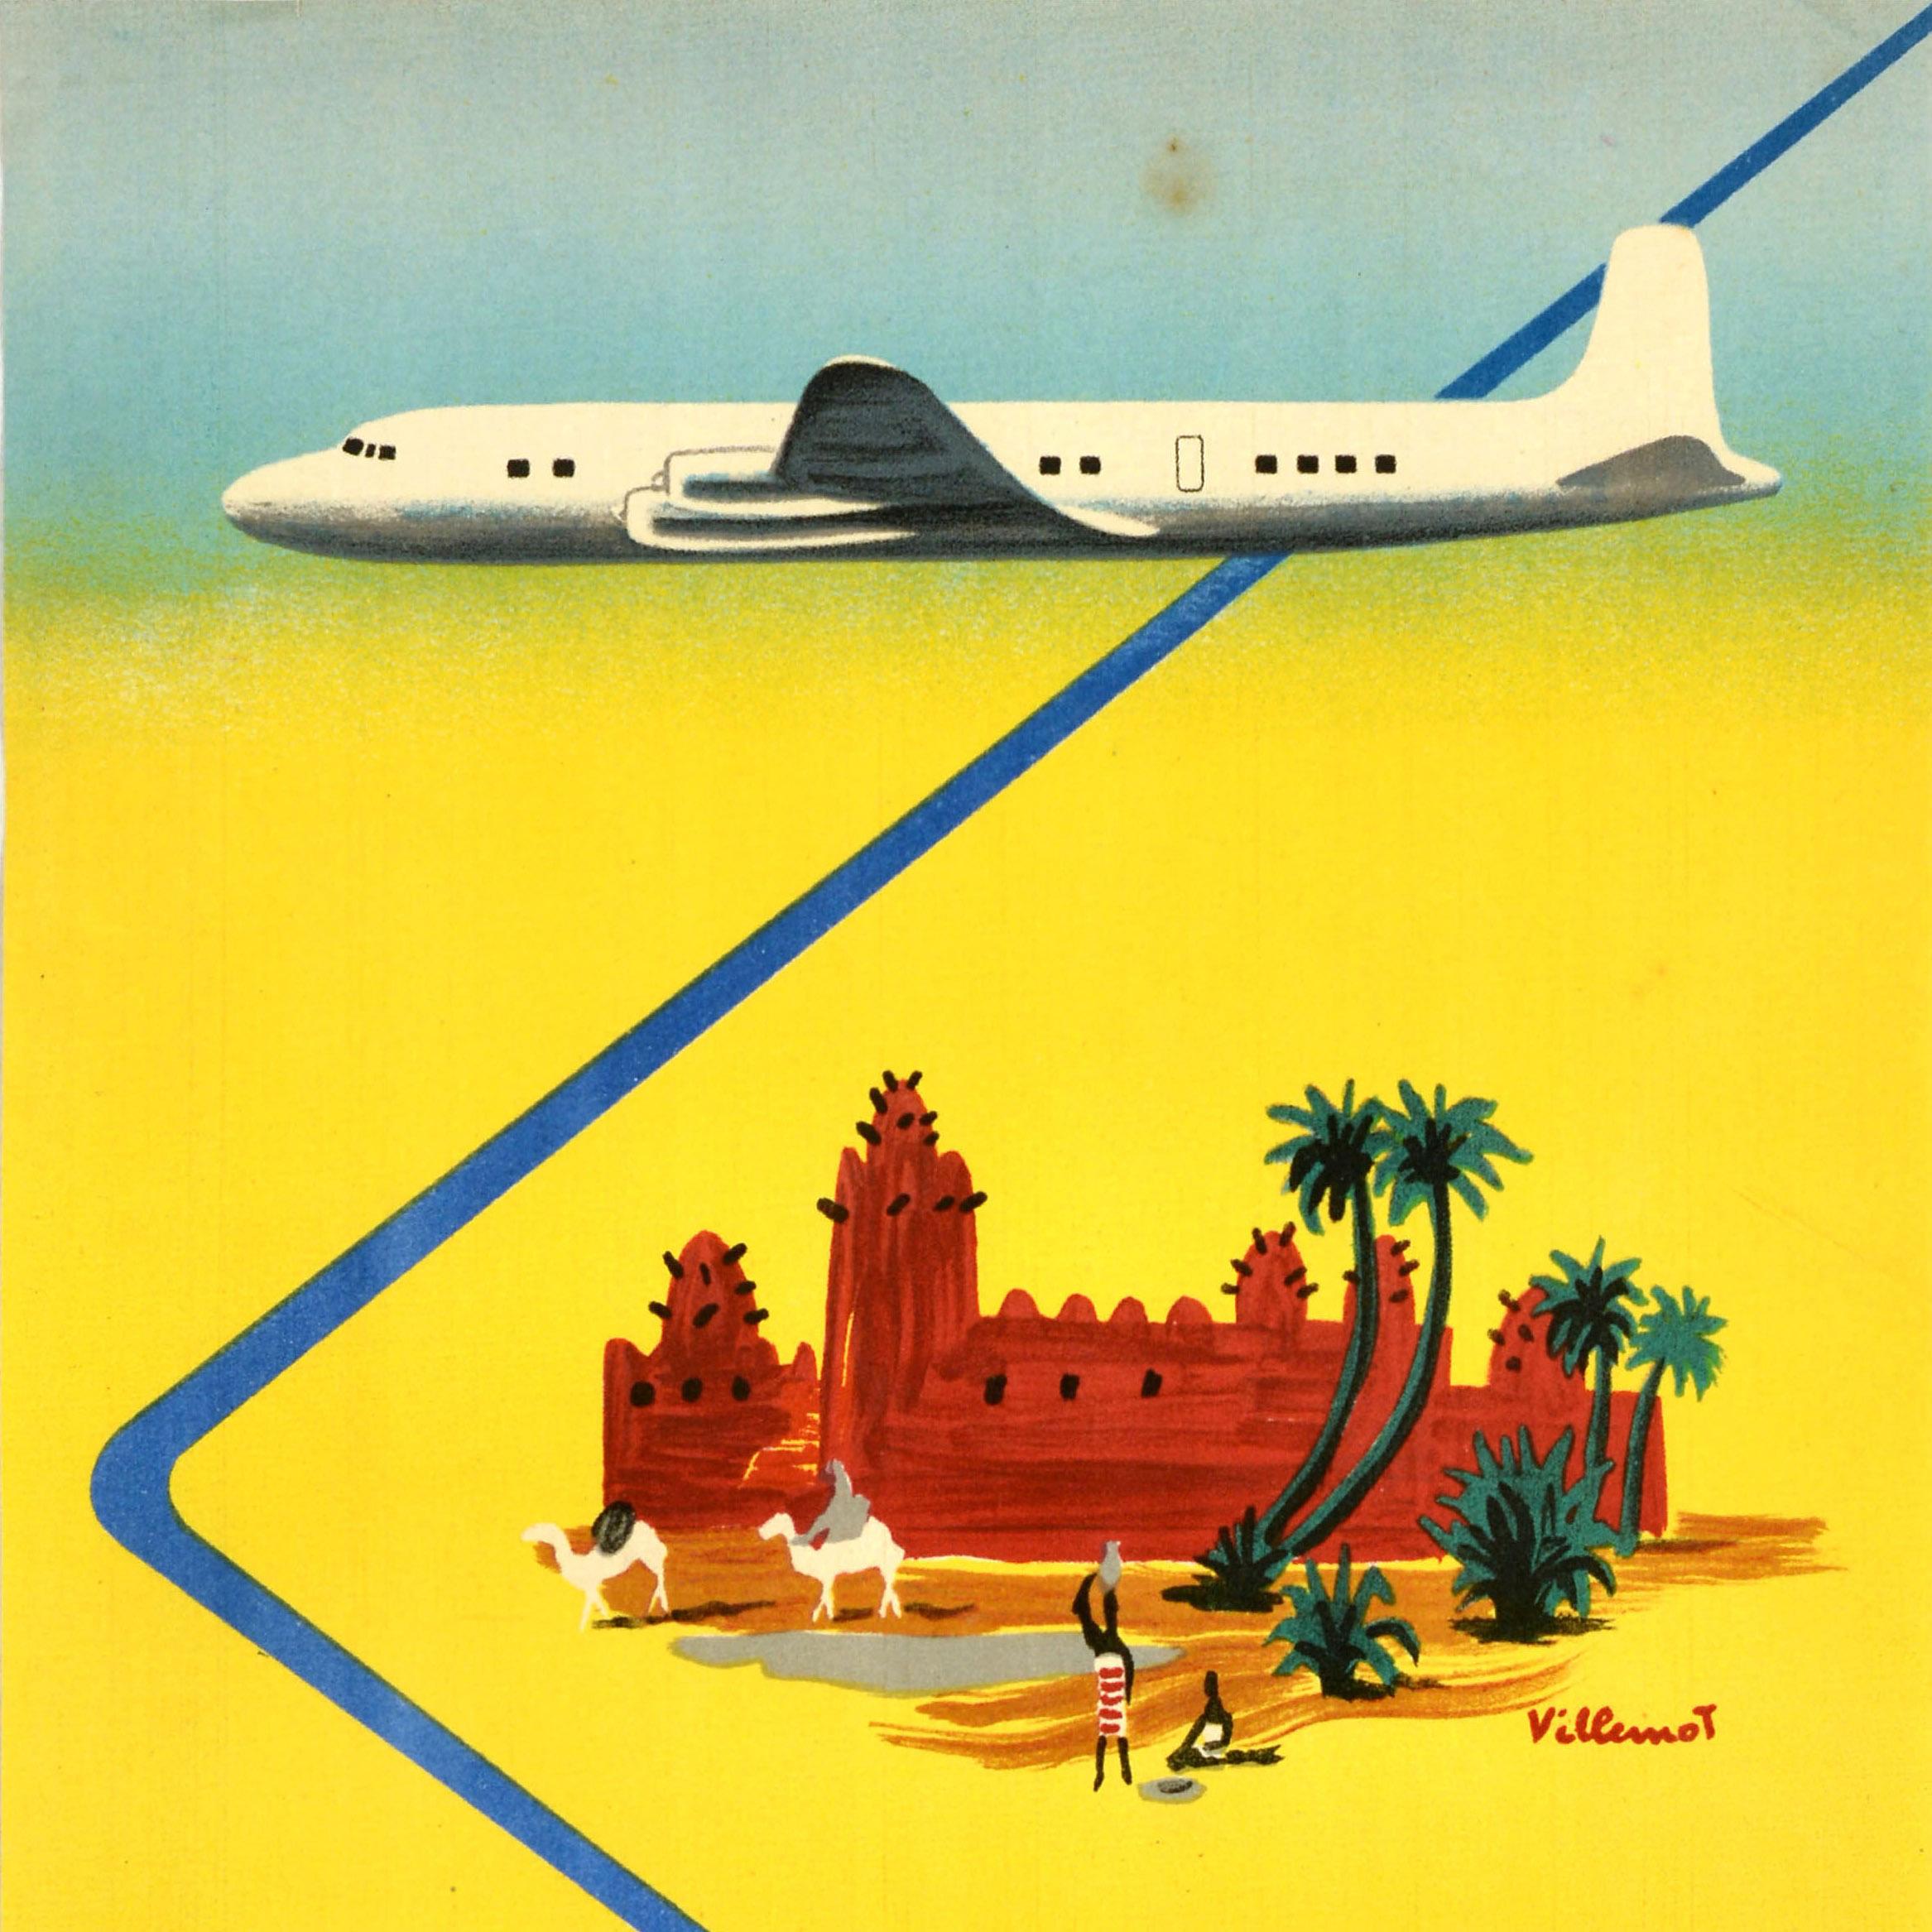 Original vintage travel poster - TAI Afrique Noire / Sub-Saharan Africa - featuring colourful artwork by the renowned graphic artist Bernard Villemot (1911-1989) depicting a plane flying above a walled city with camels and silhouettes with people